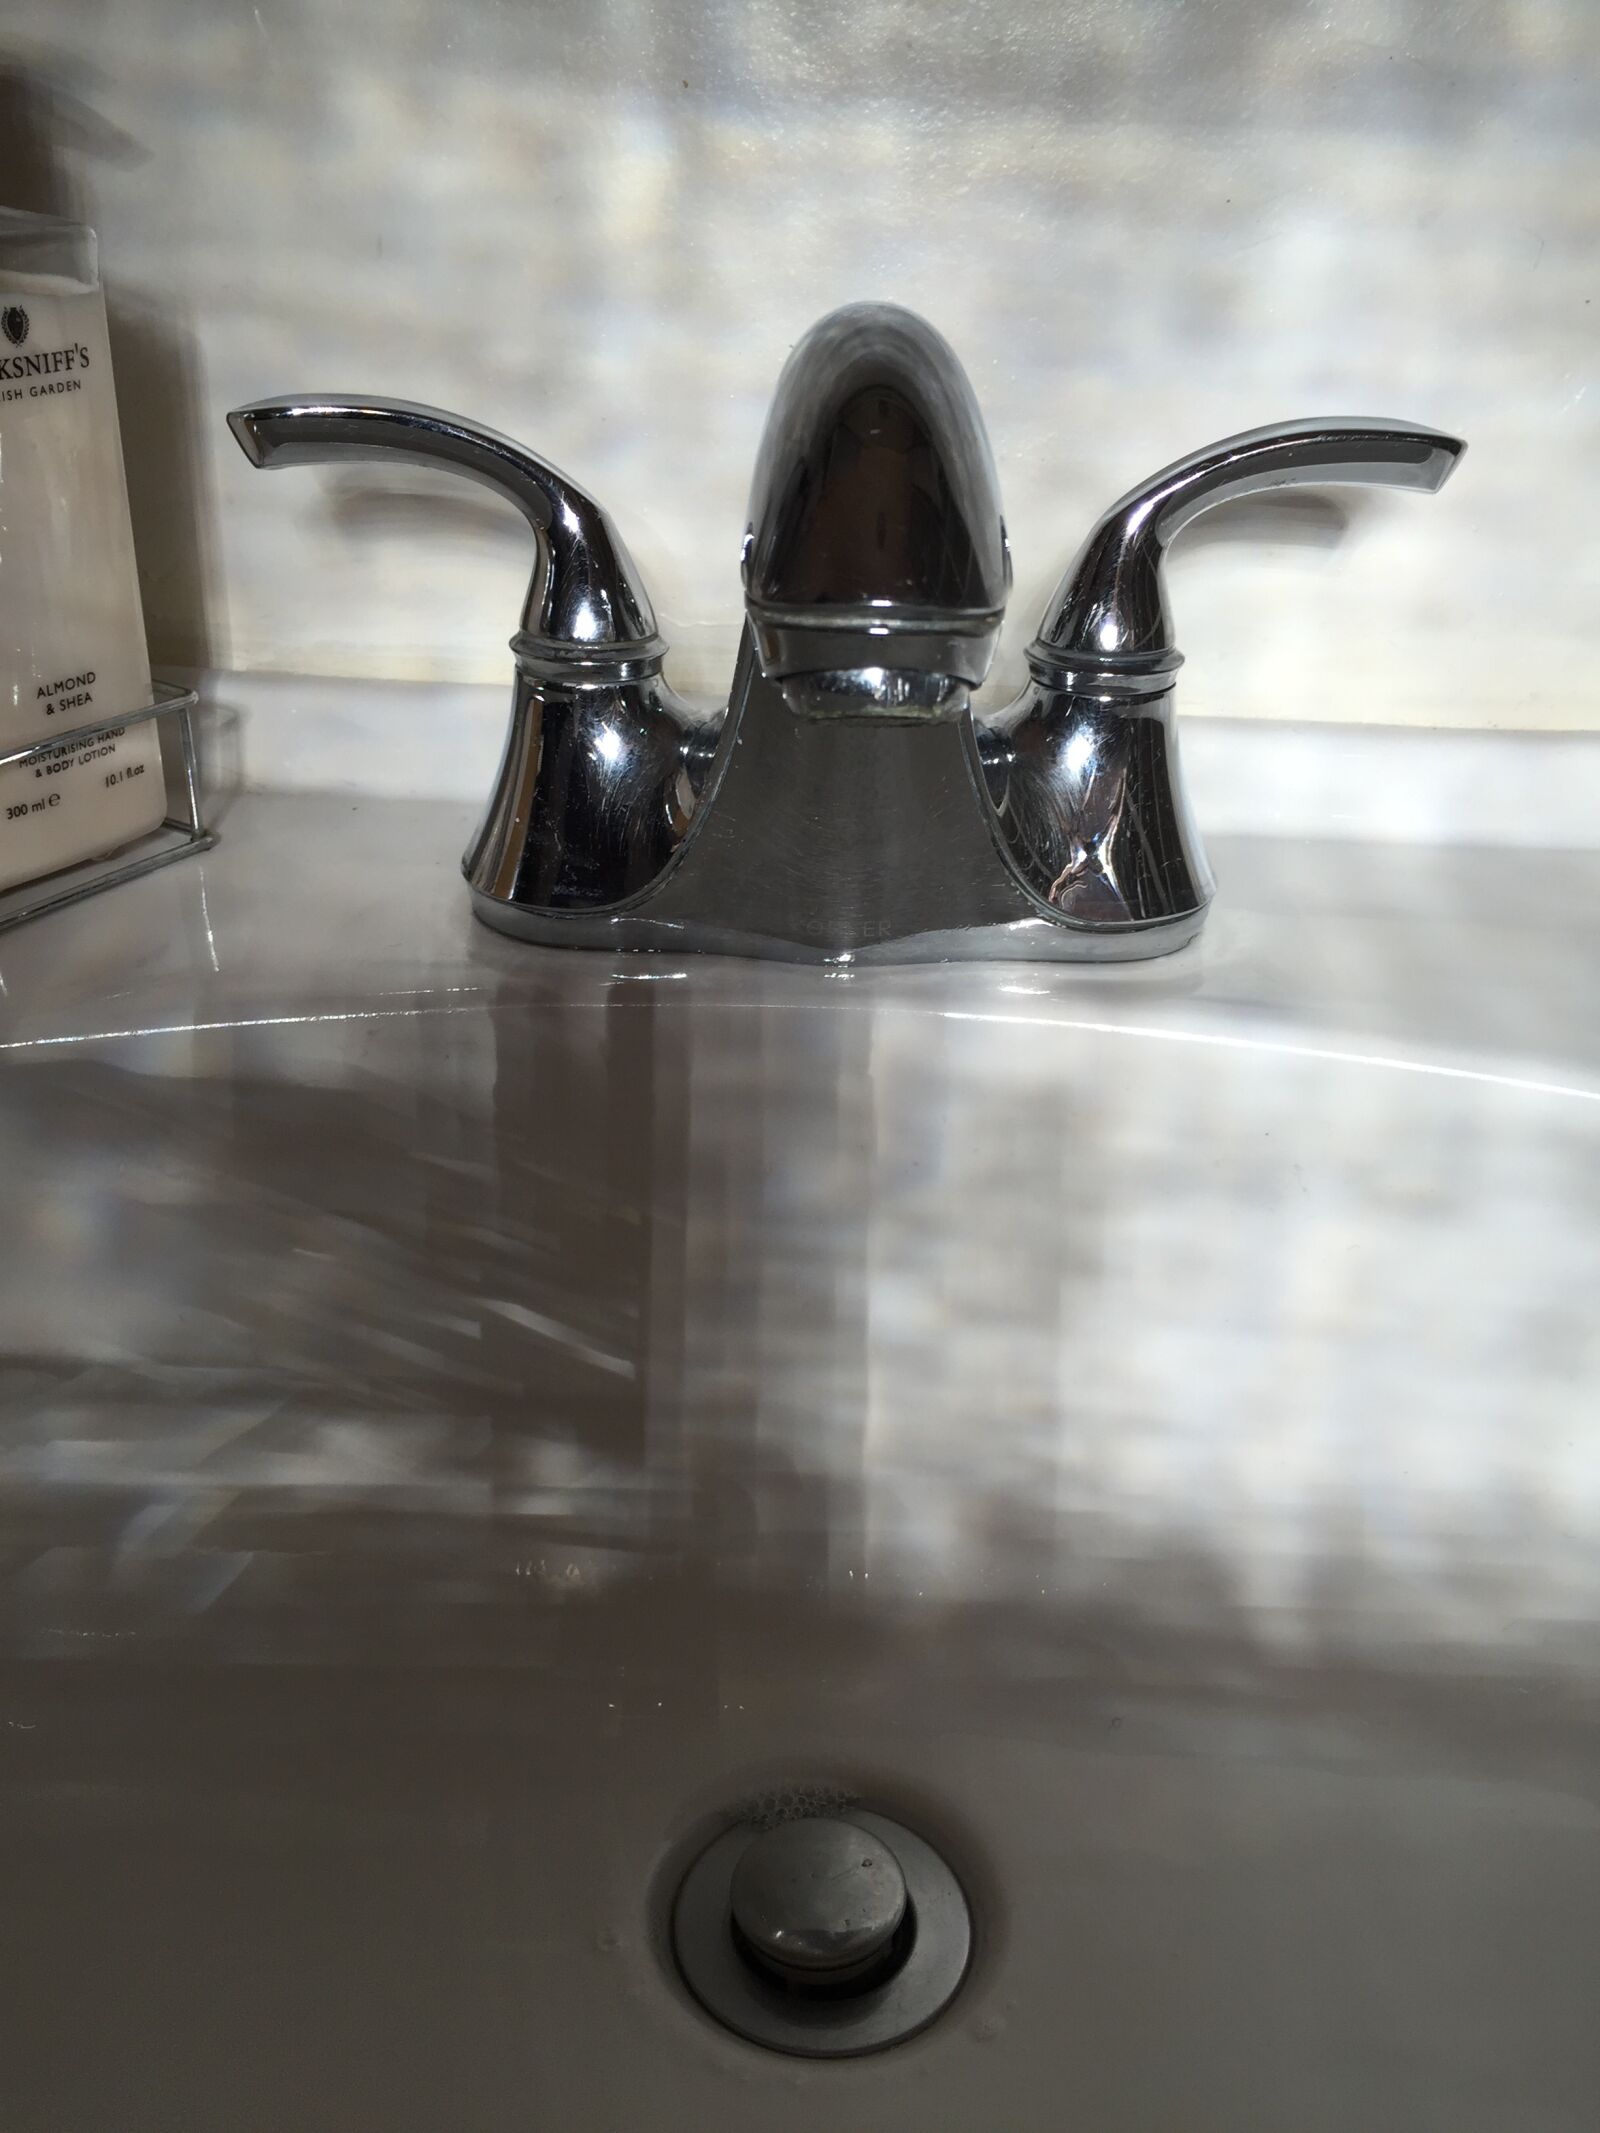 Apple iPhone 6 + iPhone 6 back camera 4.15mm f/2.2 sample photo. Faucet, sink, bath photography